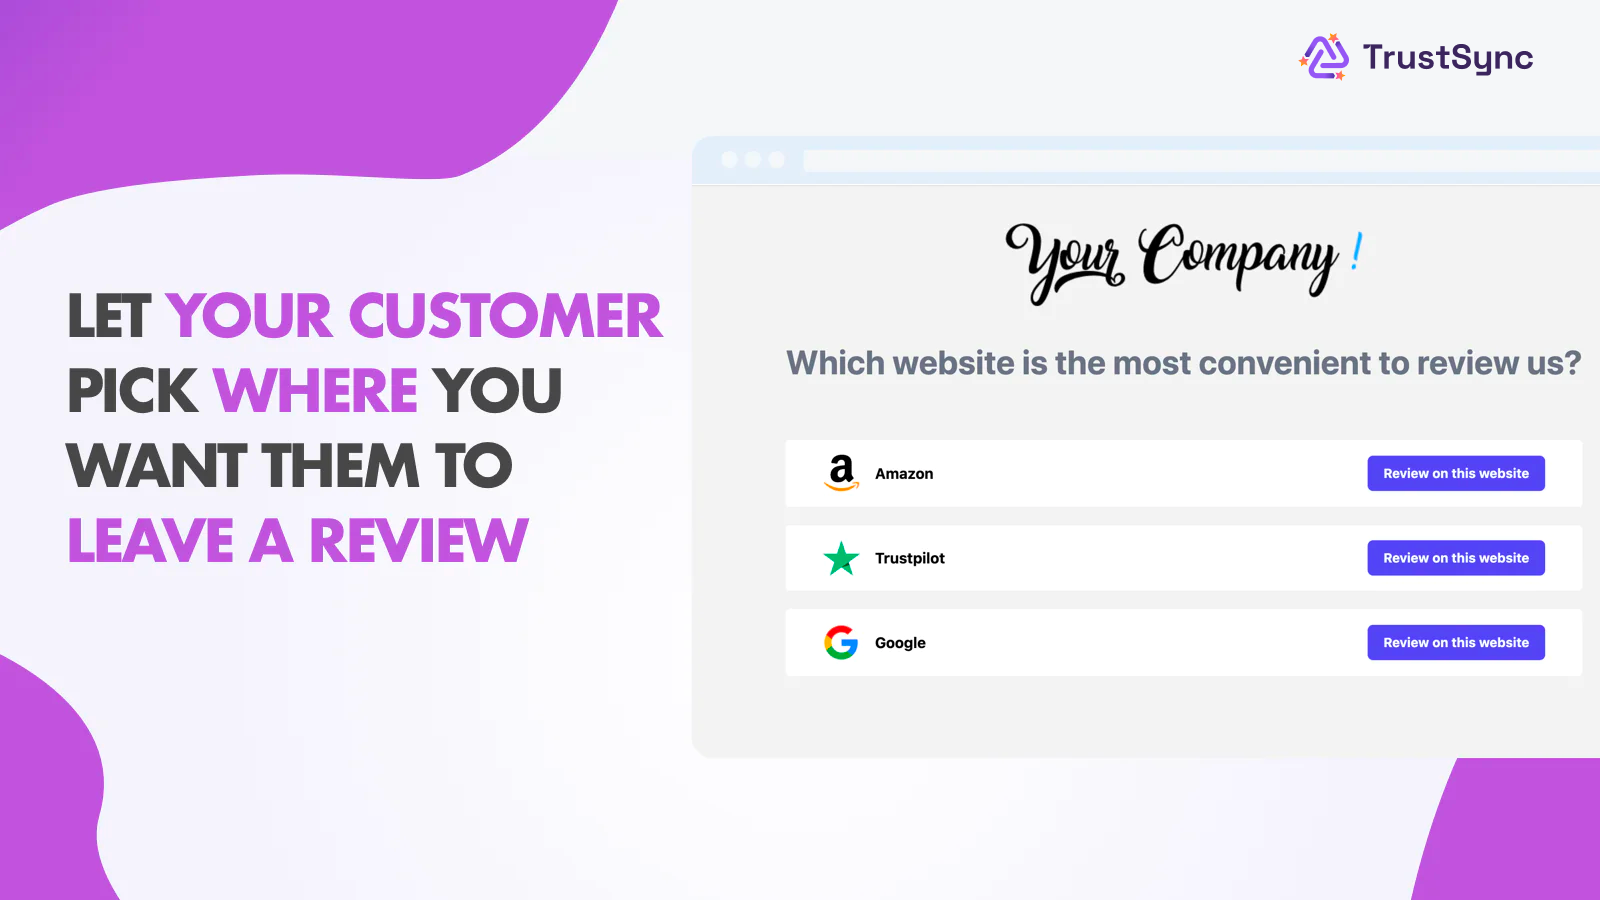 Let your customer pick where you want them to leave a review